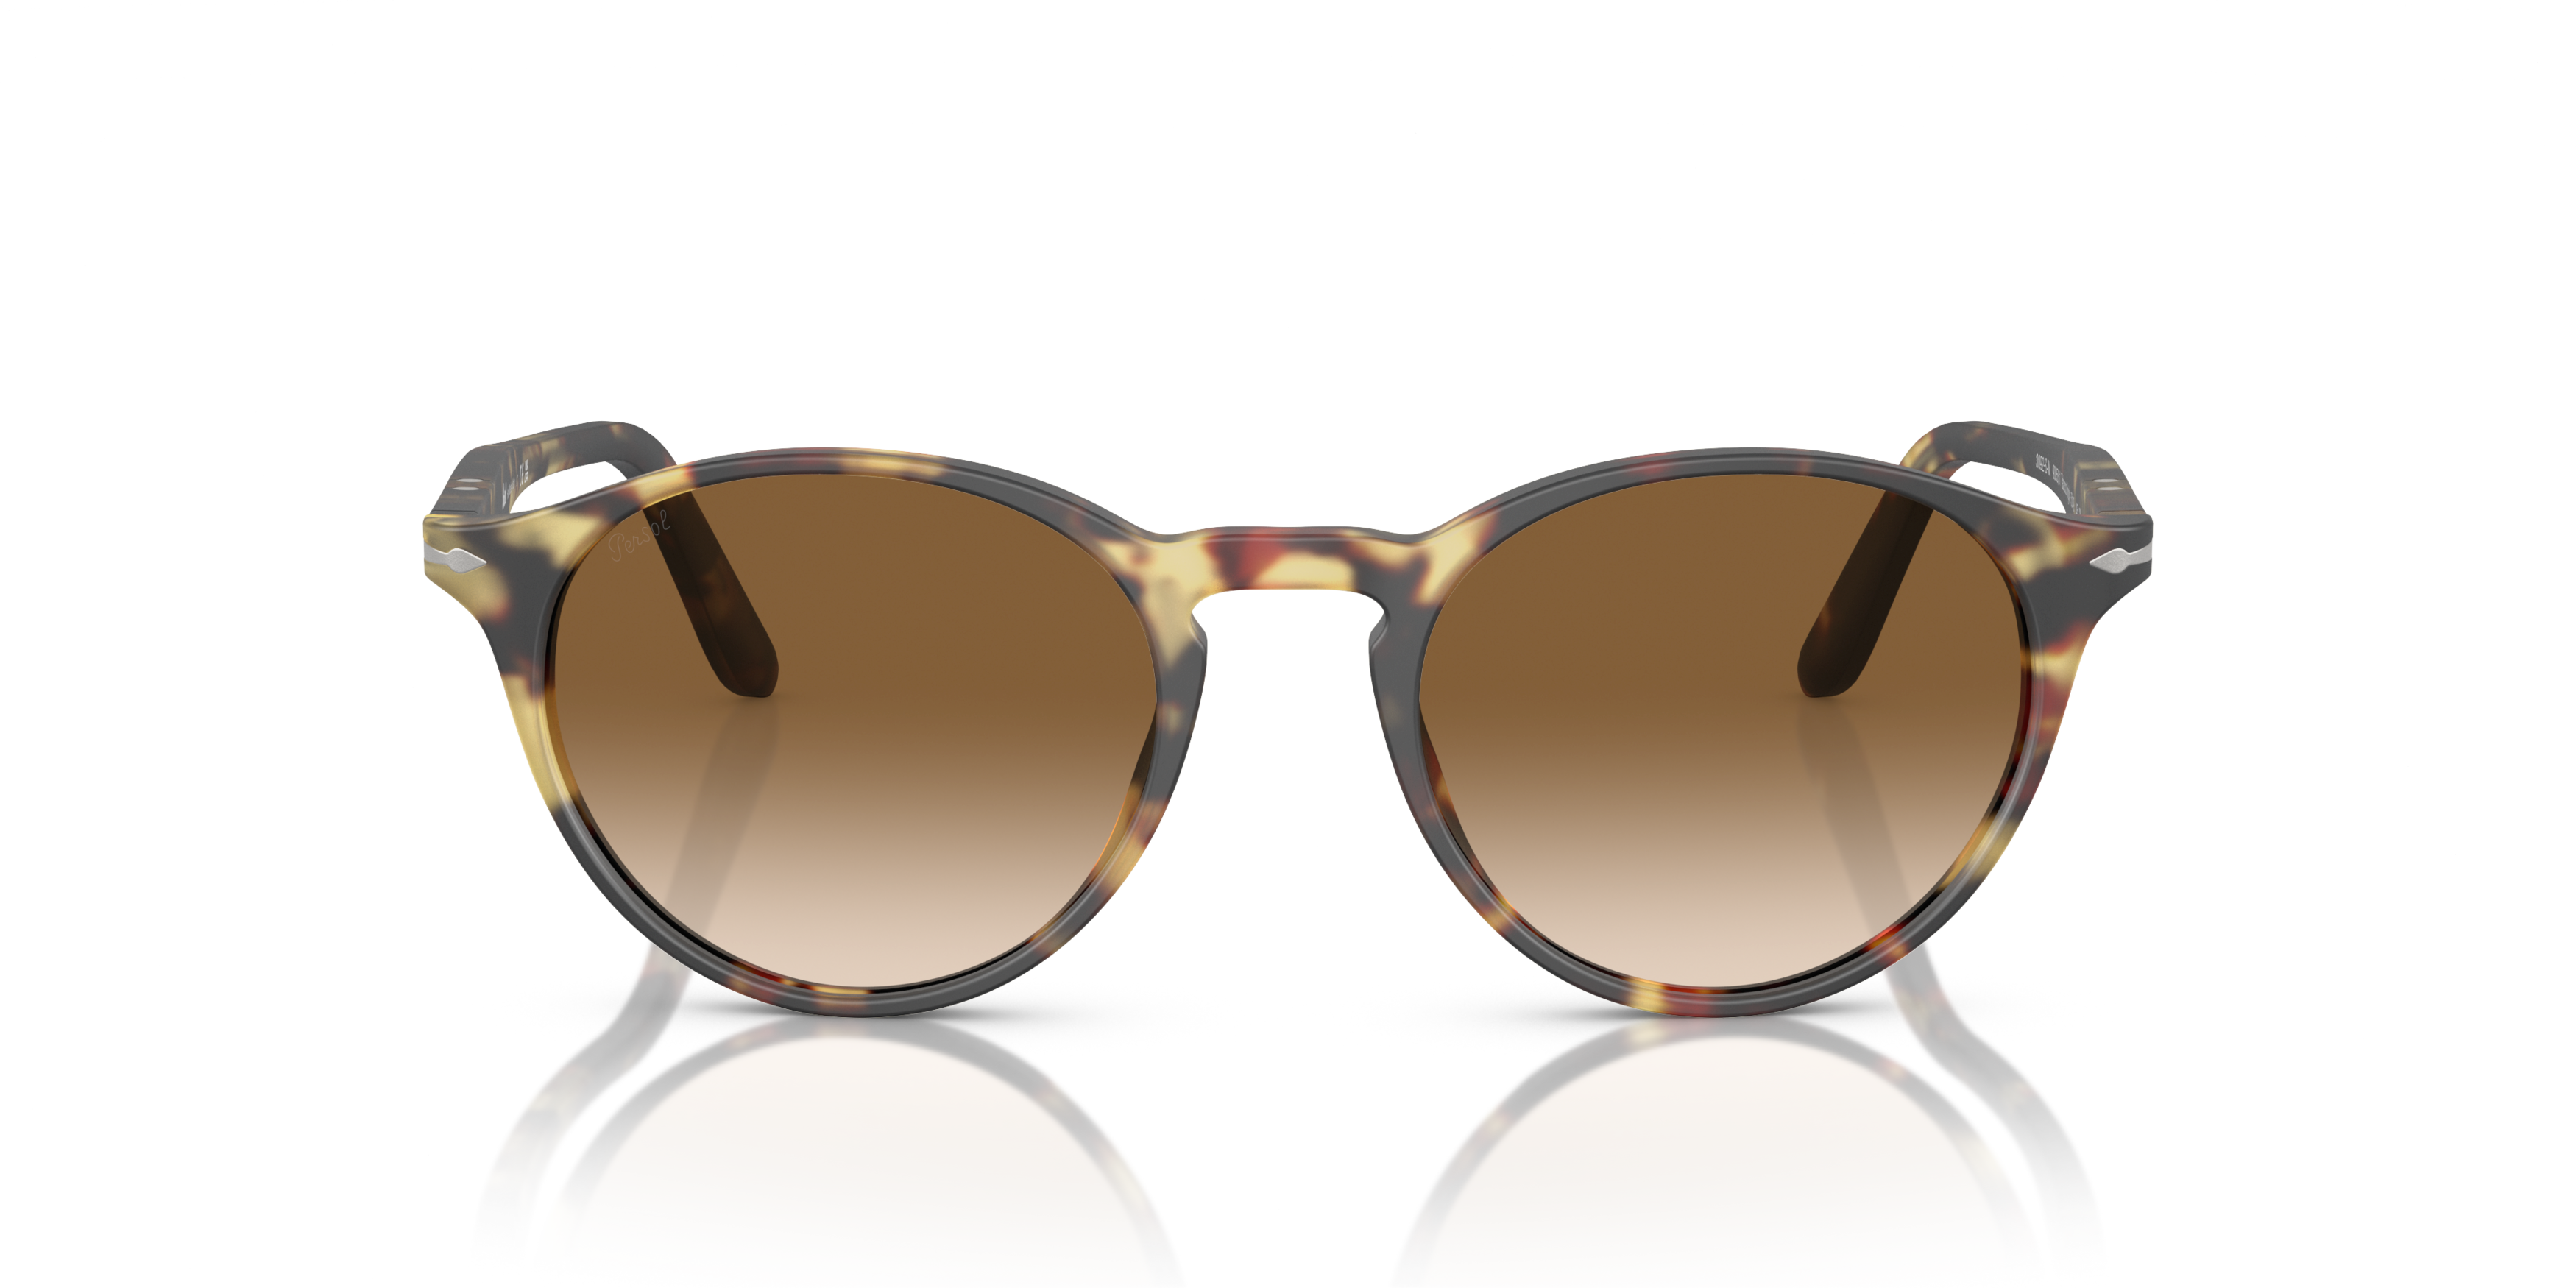 [products.image.front] PERSOL PO3092SM 900551